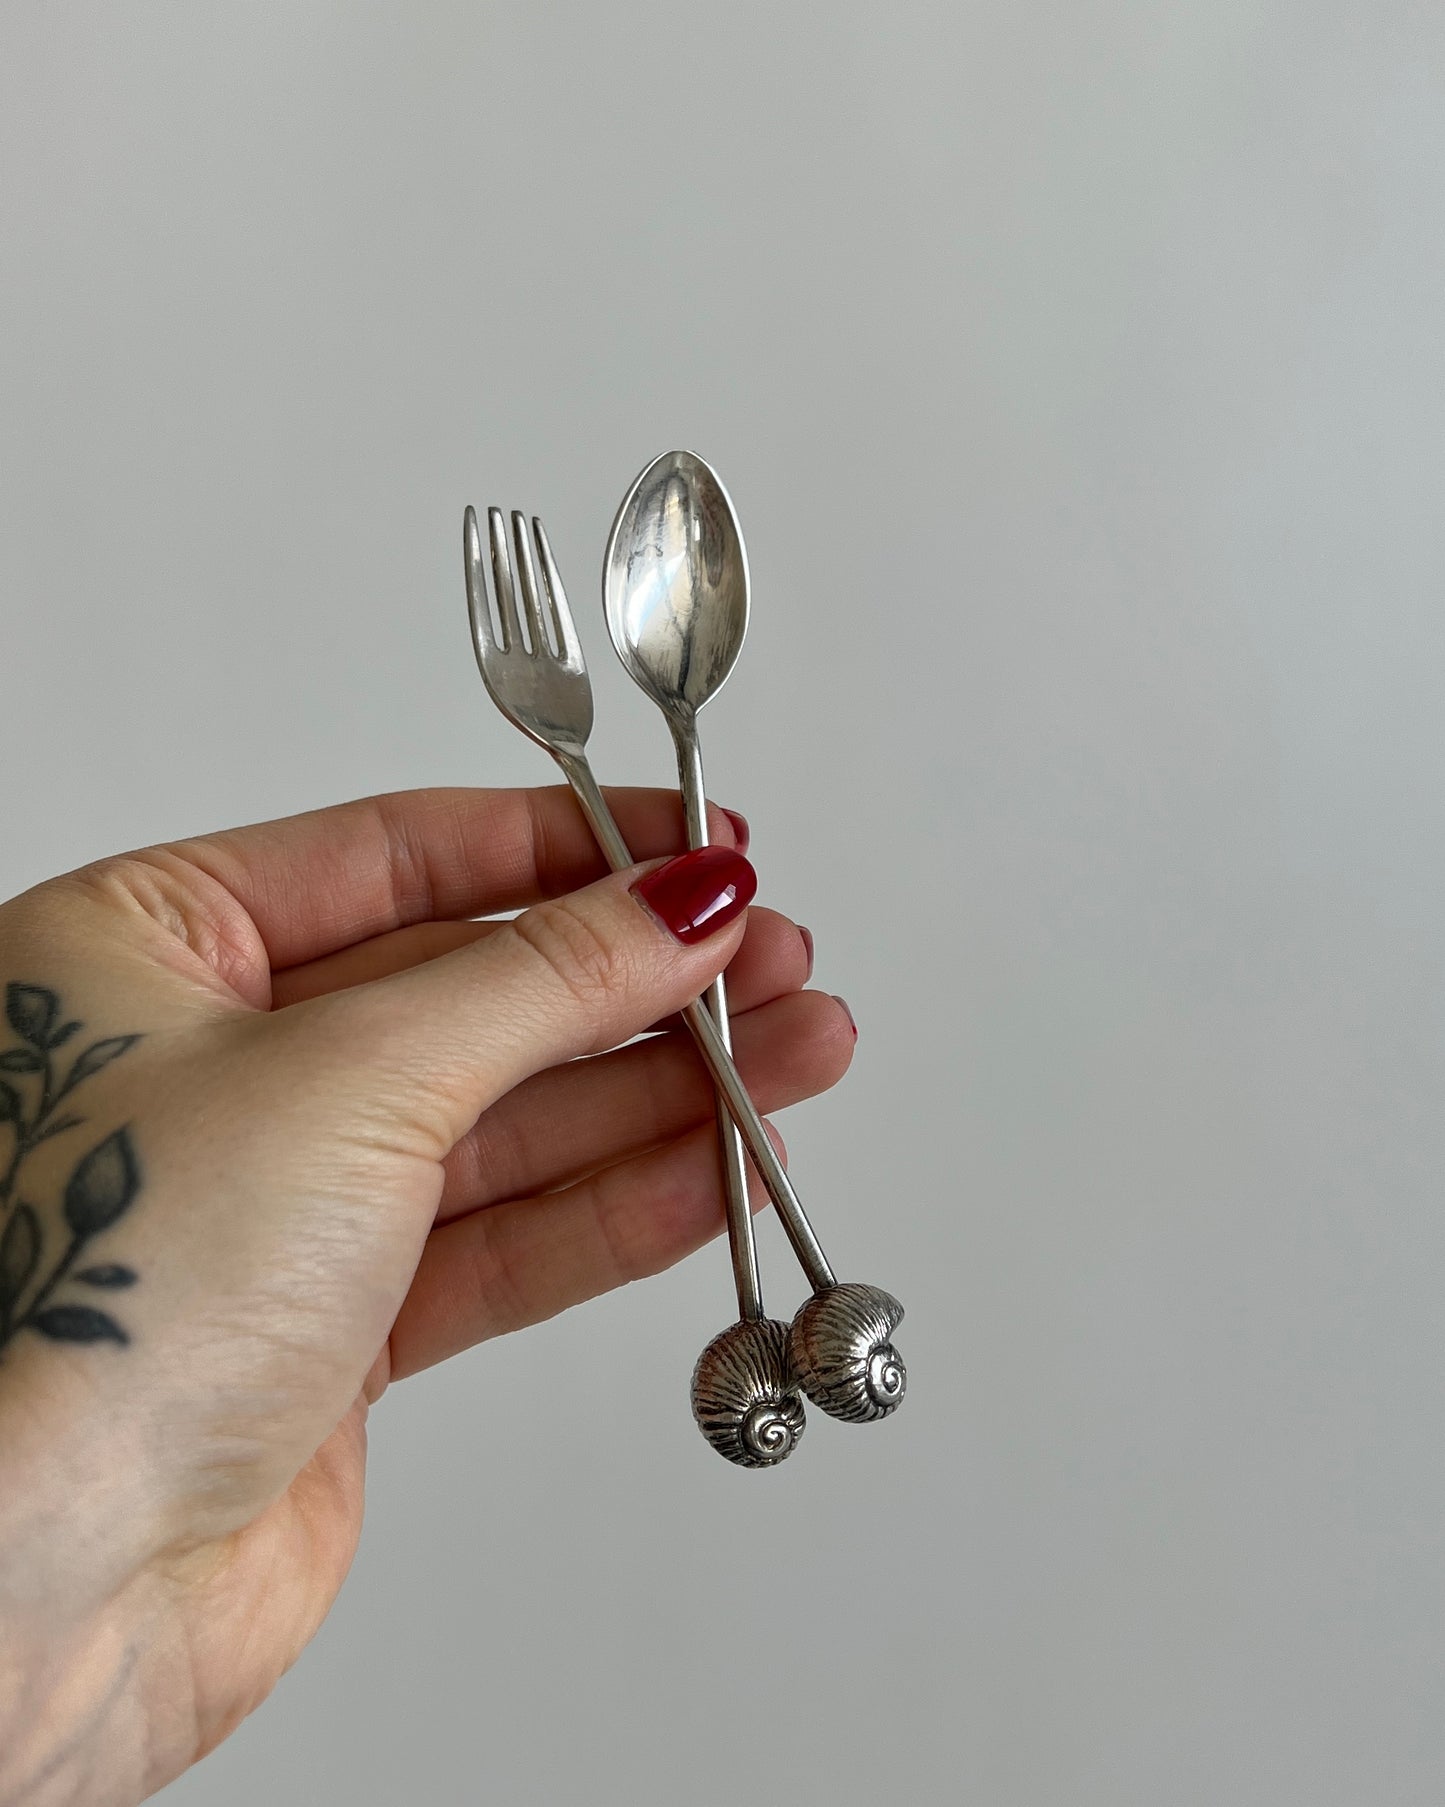 Vintage Little Teaspoon and Fork with Shells